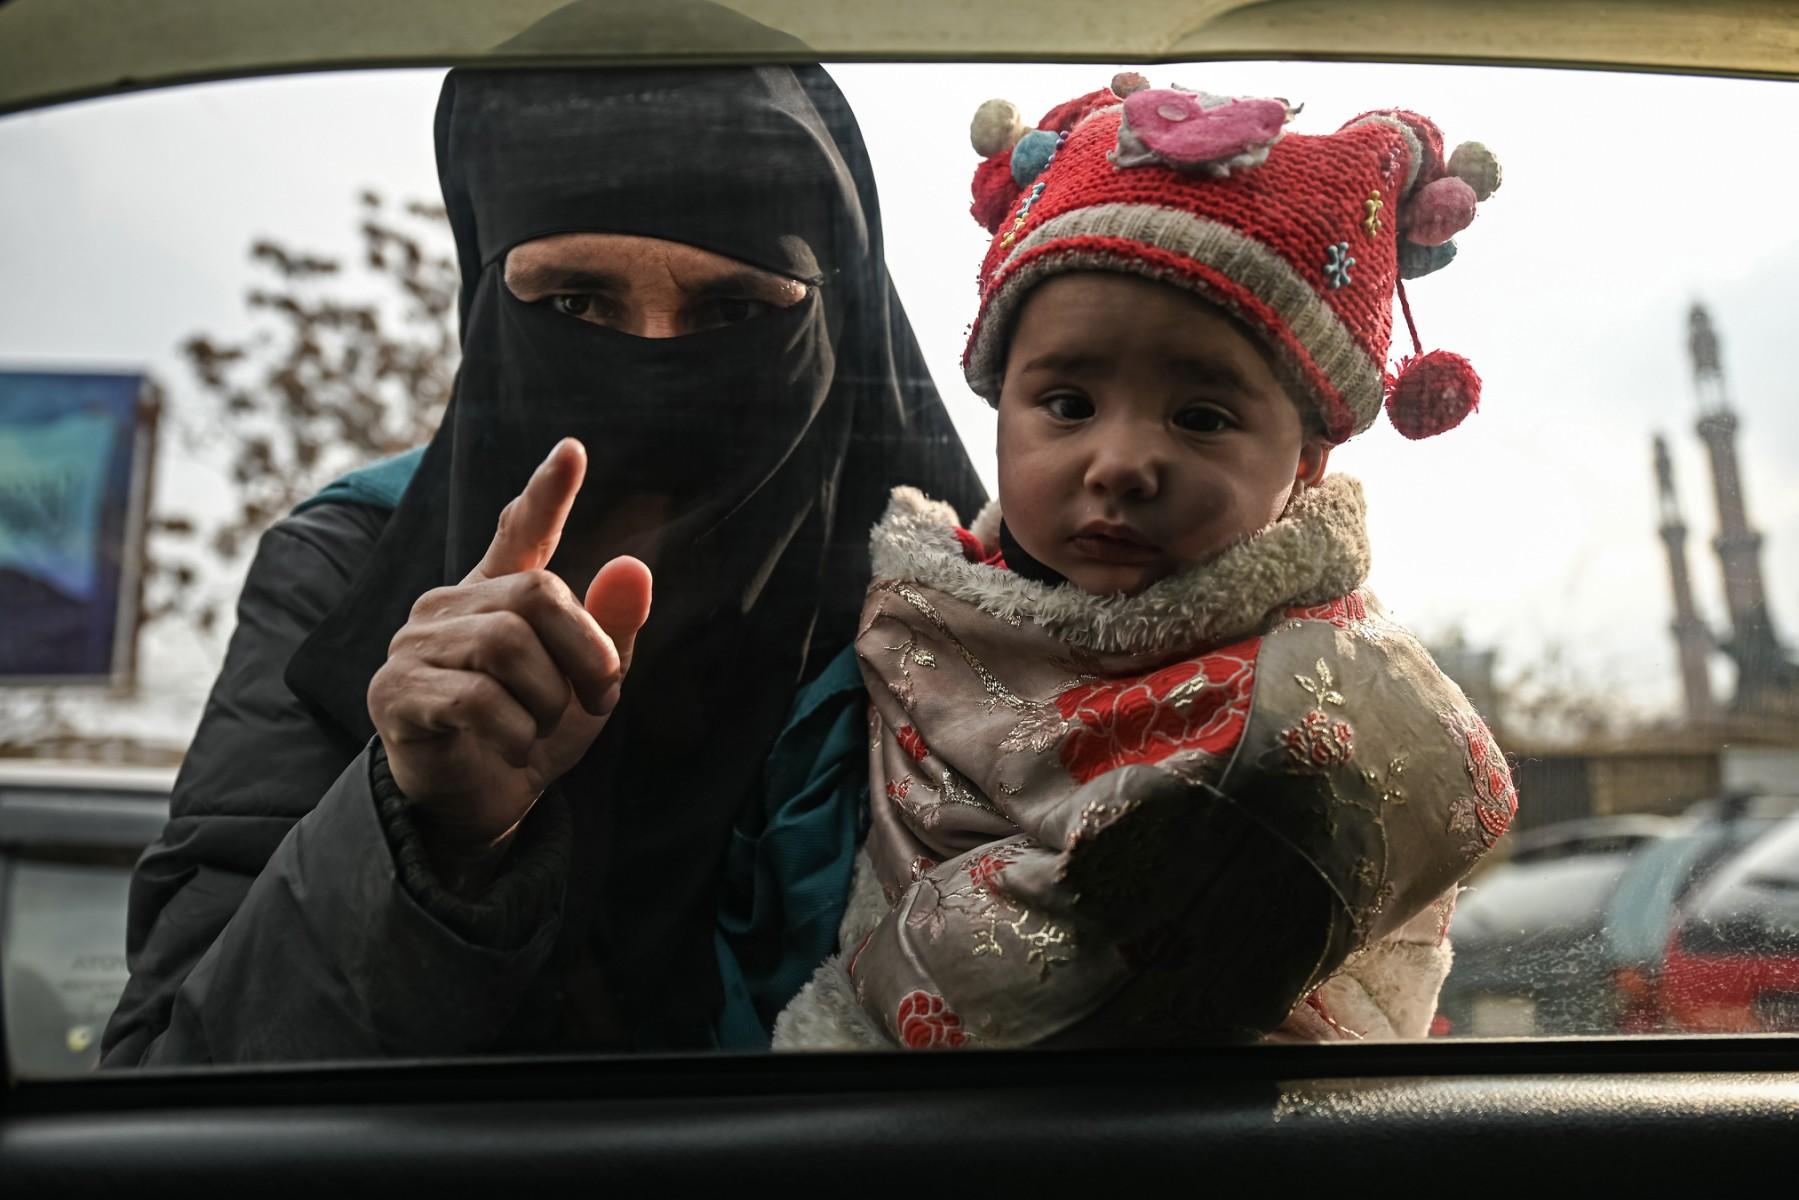 A woman carries a child as she begs from commuters in a car in Kabul on Dec 26. Photo: AFP